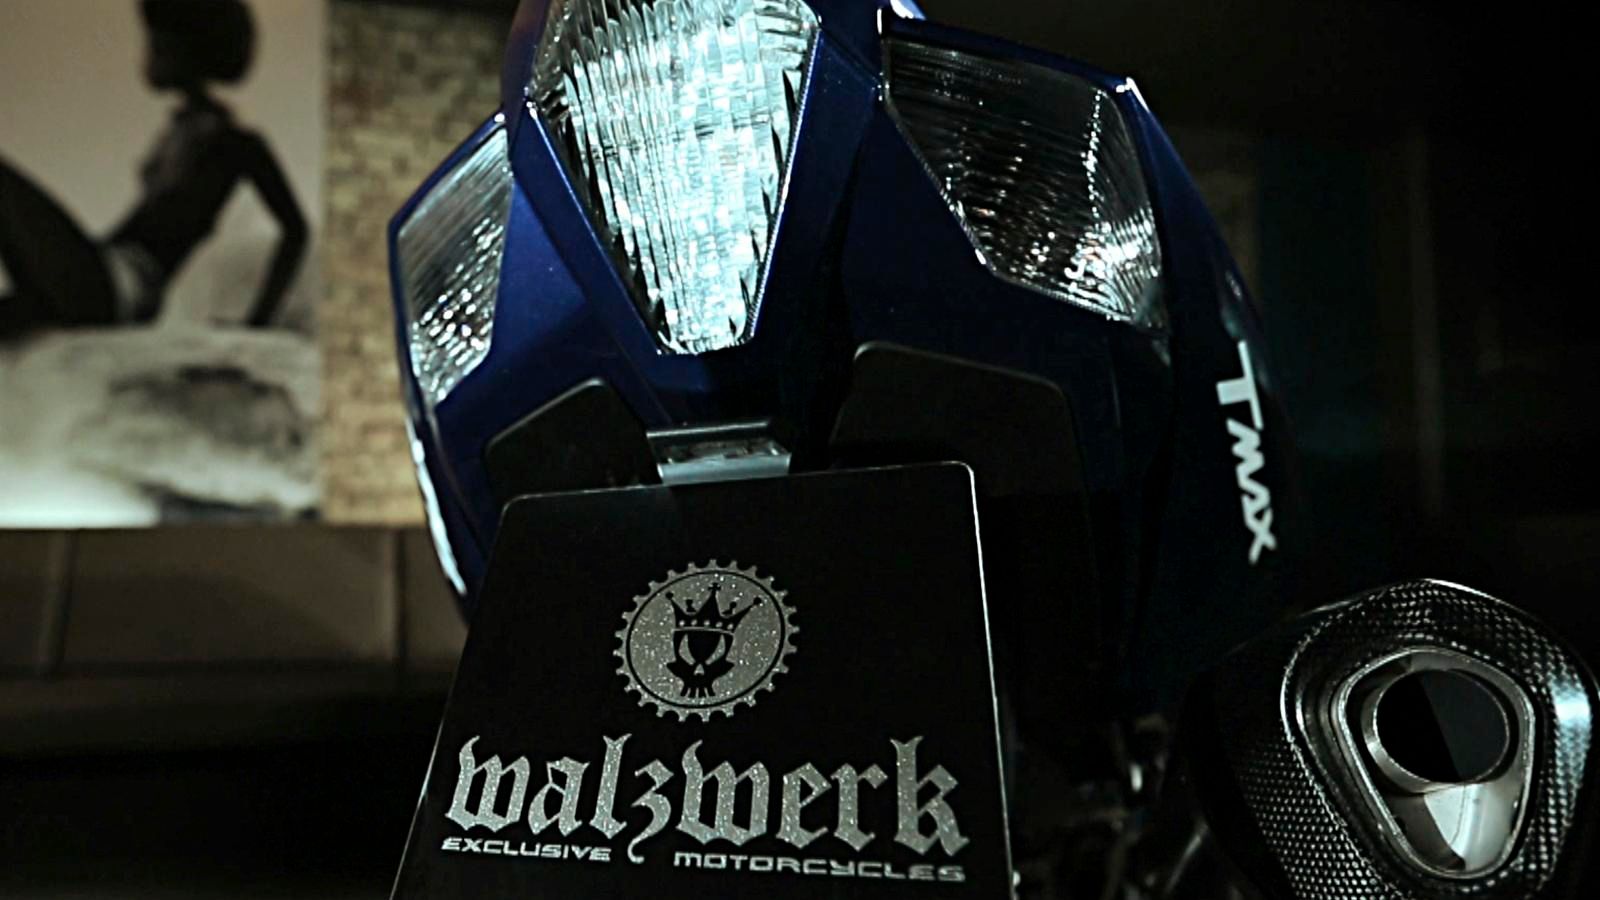 2012 Yamaha T-Max Hyper Modified by Marcus Walz